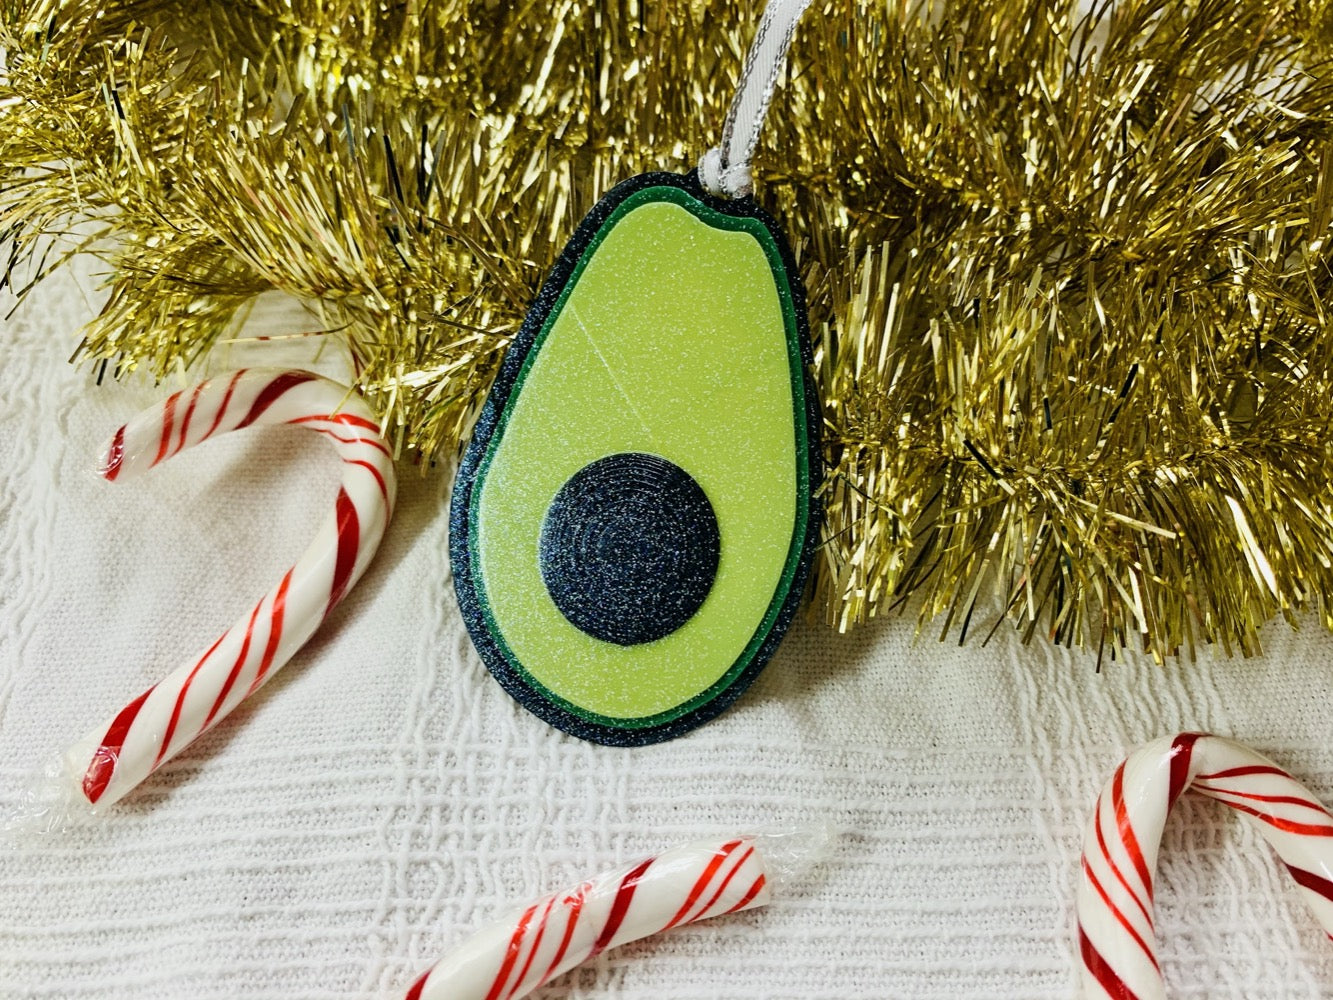 On a white fabric and gold garland background is a R+D 3D Printed ornament. It is shaped like an avocado that has been split open with a black peel, bright green highlights and lime green in the center. There is also a raised black pit in the middle. The entire ornament is covered in glitter so it will shine and shimmer in the light. To the side there are also red and white candy canes.